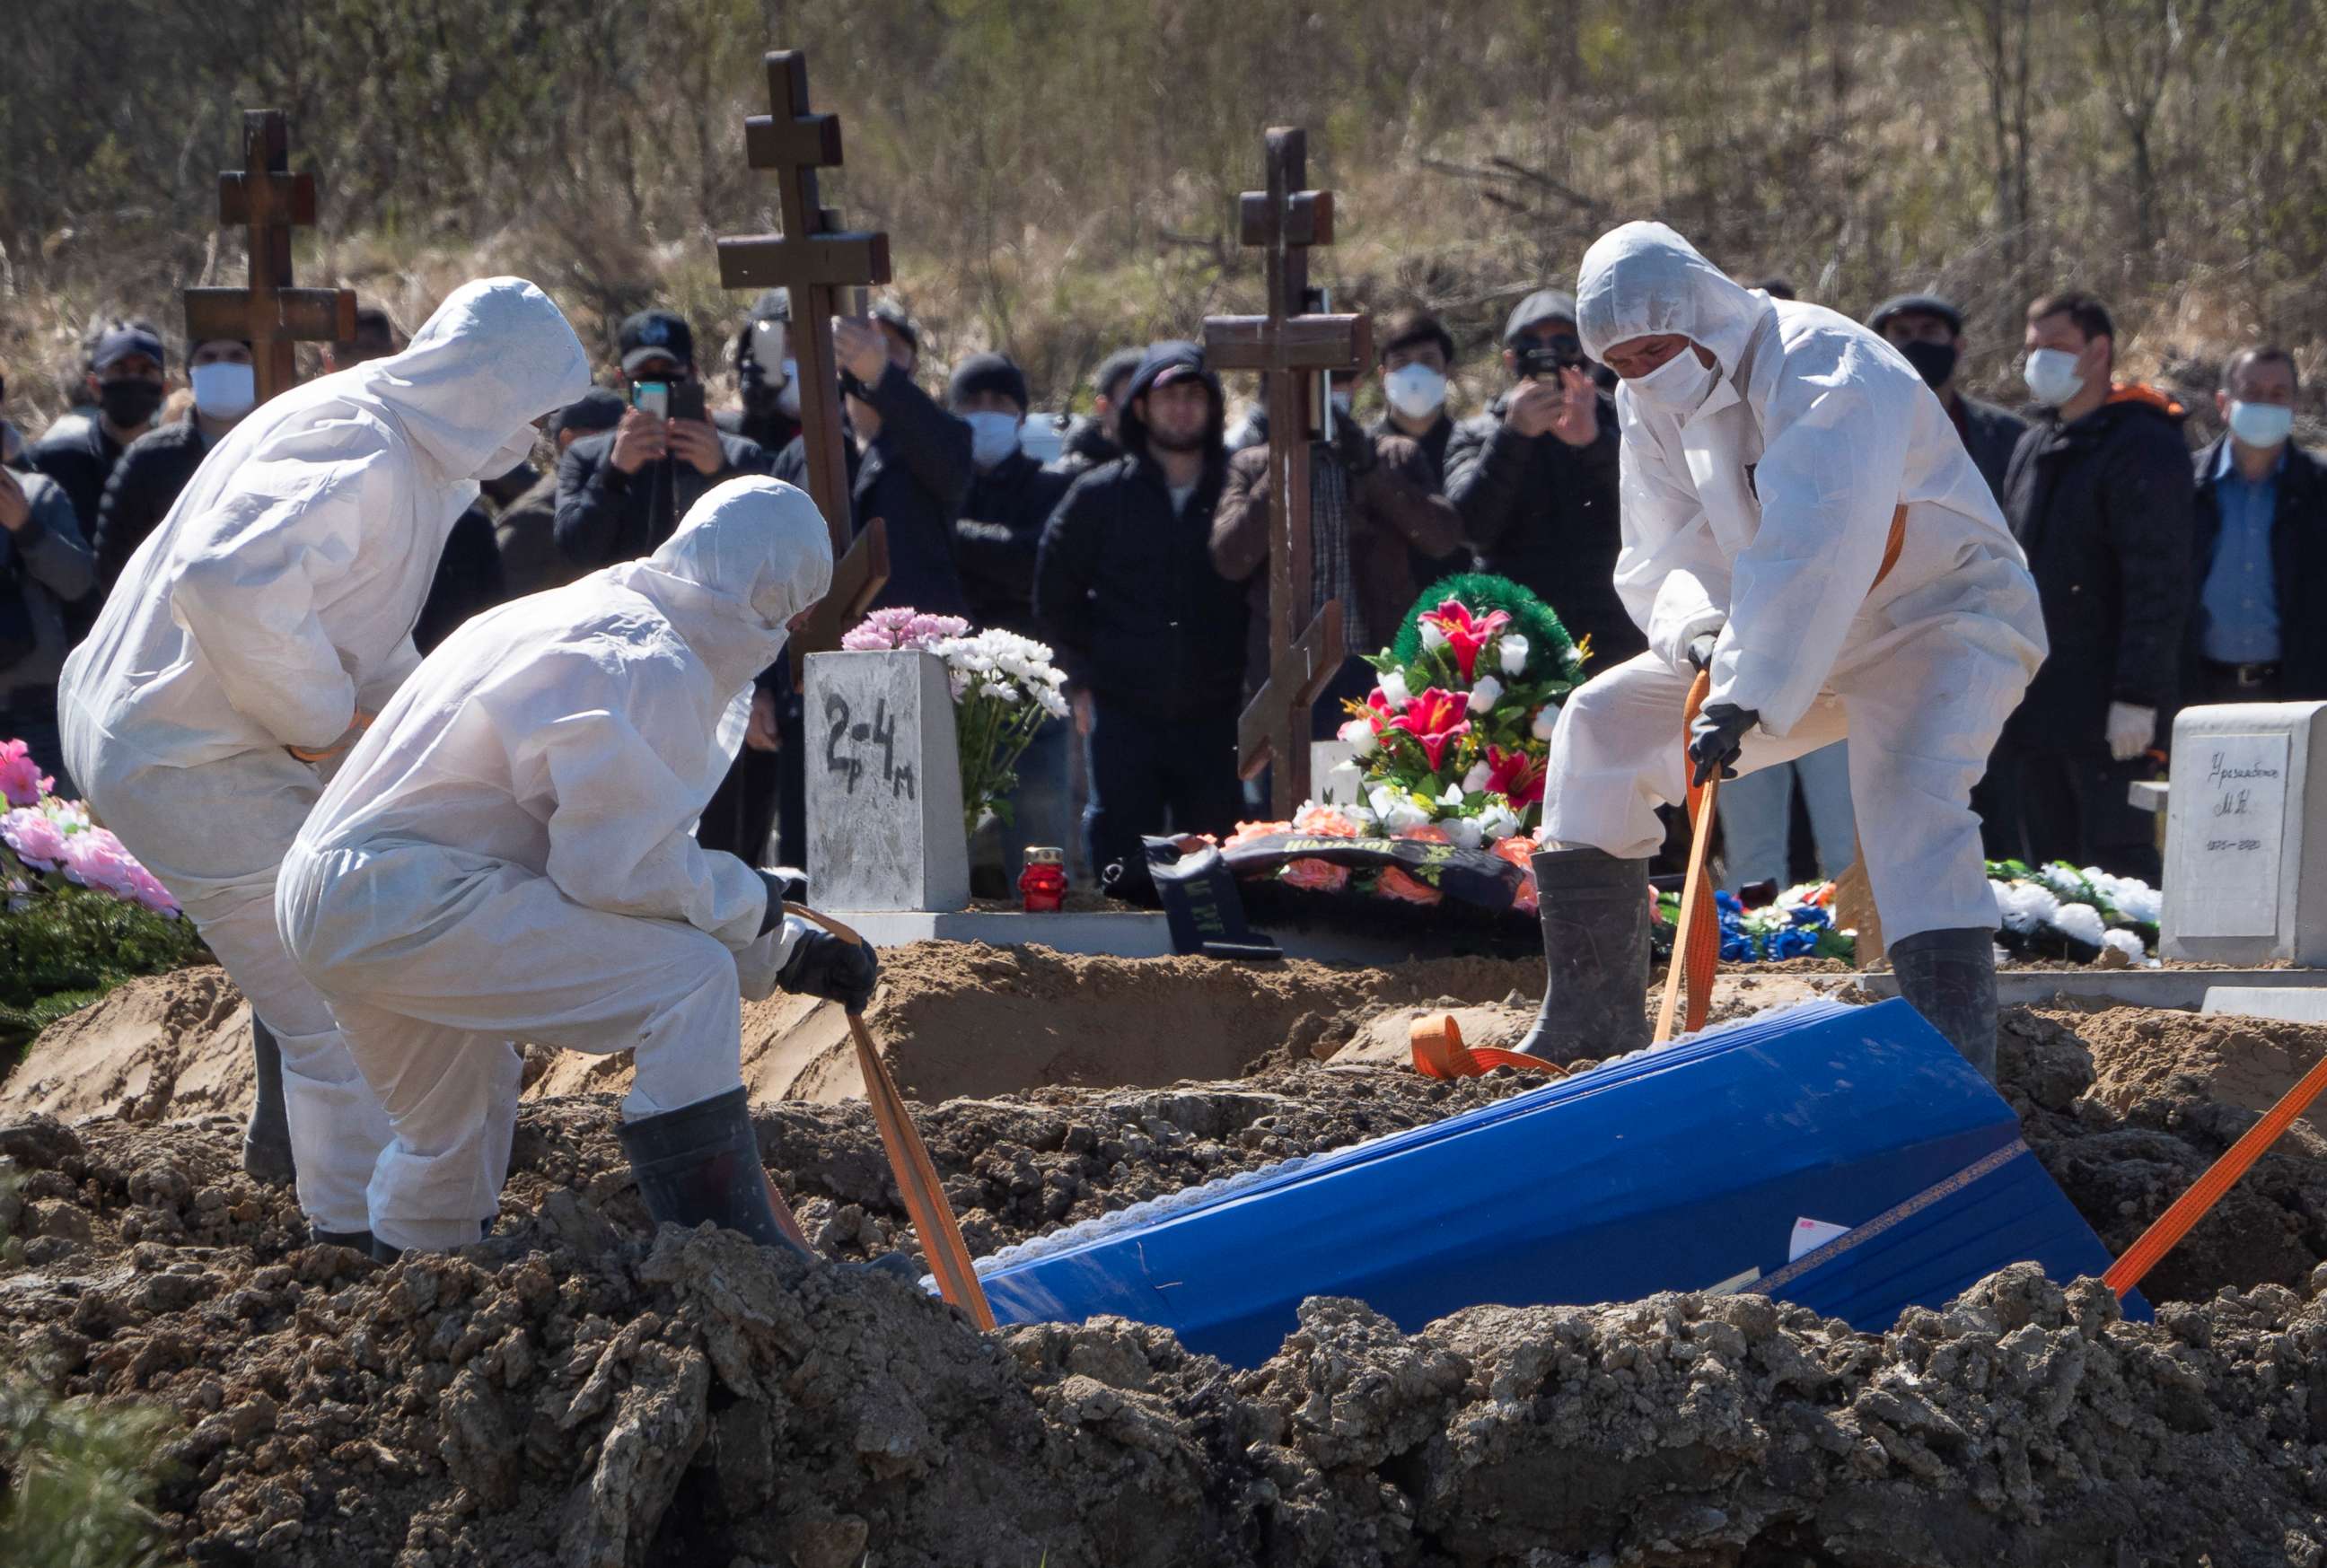 PHOTO: Grave diggers wearing protective suits bury a COVID-19 victim as relatives and friends stand at a safe distance, in the special purpose for coronavirus victims section of a cemetery in Kolpino, outside St.Petersburg, Russia, Sunday, May 10, 2020.